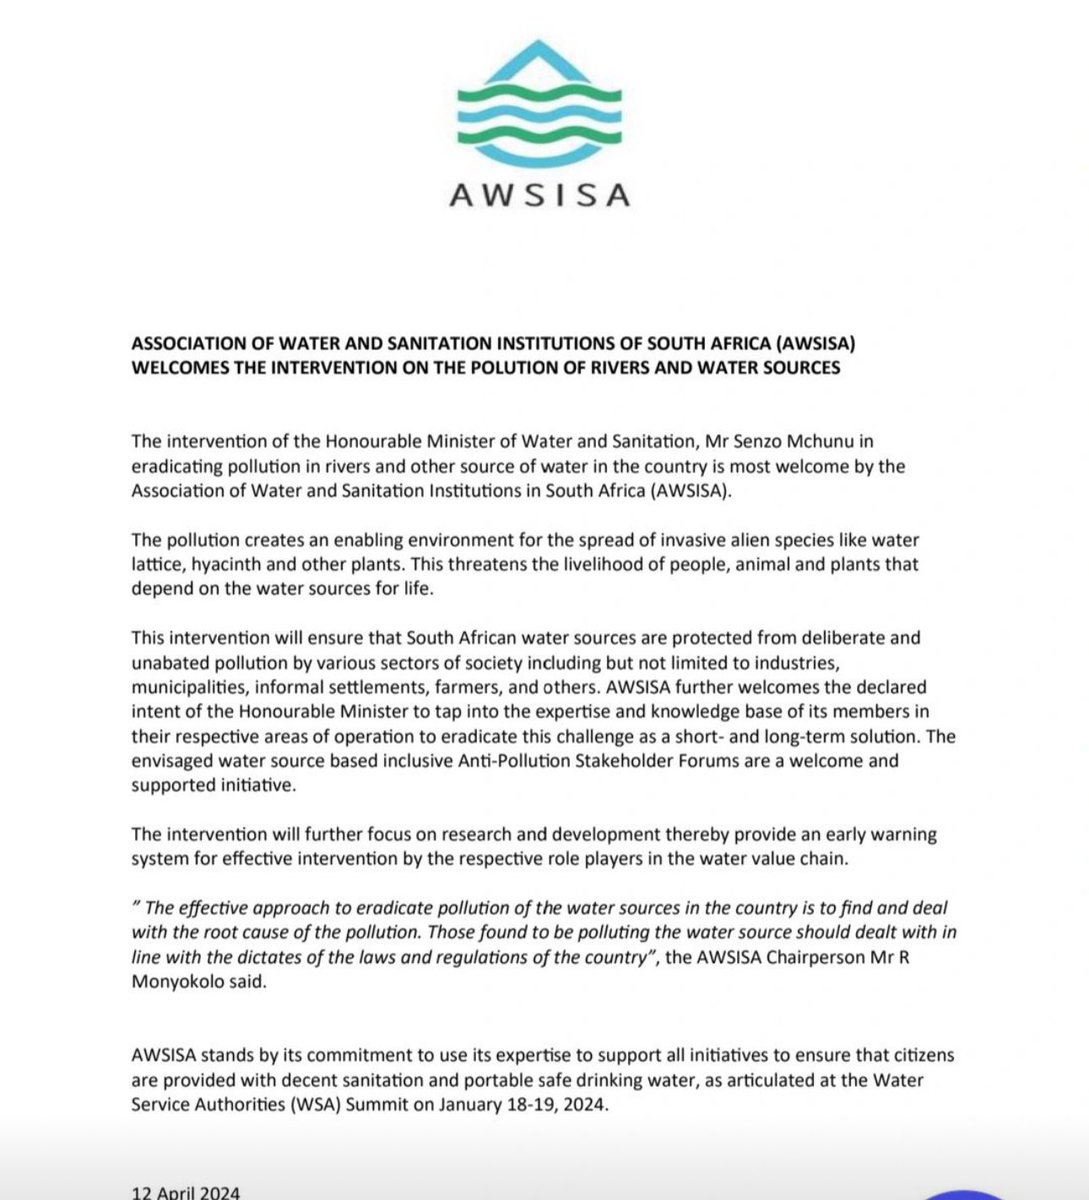 🚨Media Statement🚨 The Association of Water and Sanitation Institutions of South Africa (AWSISA) welcomes the intervention on the pollution of rivers and water sources. @DWS_RSA @SaveTheVaal @afriforum @WaterCANsa #AWSISA #RWWaterSustainability #RW120YearsofExcellence [NS]